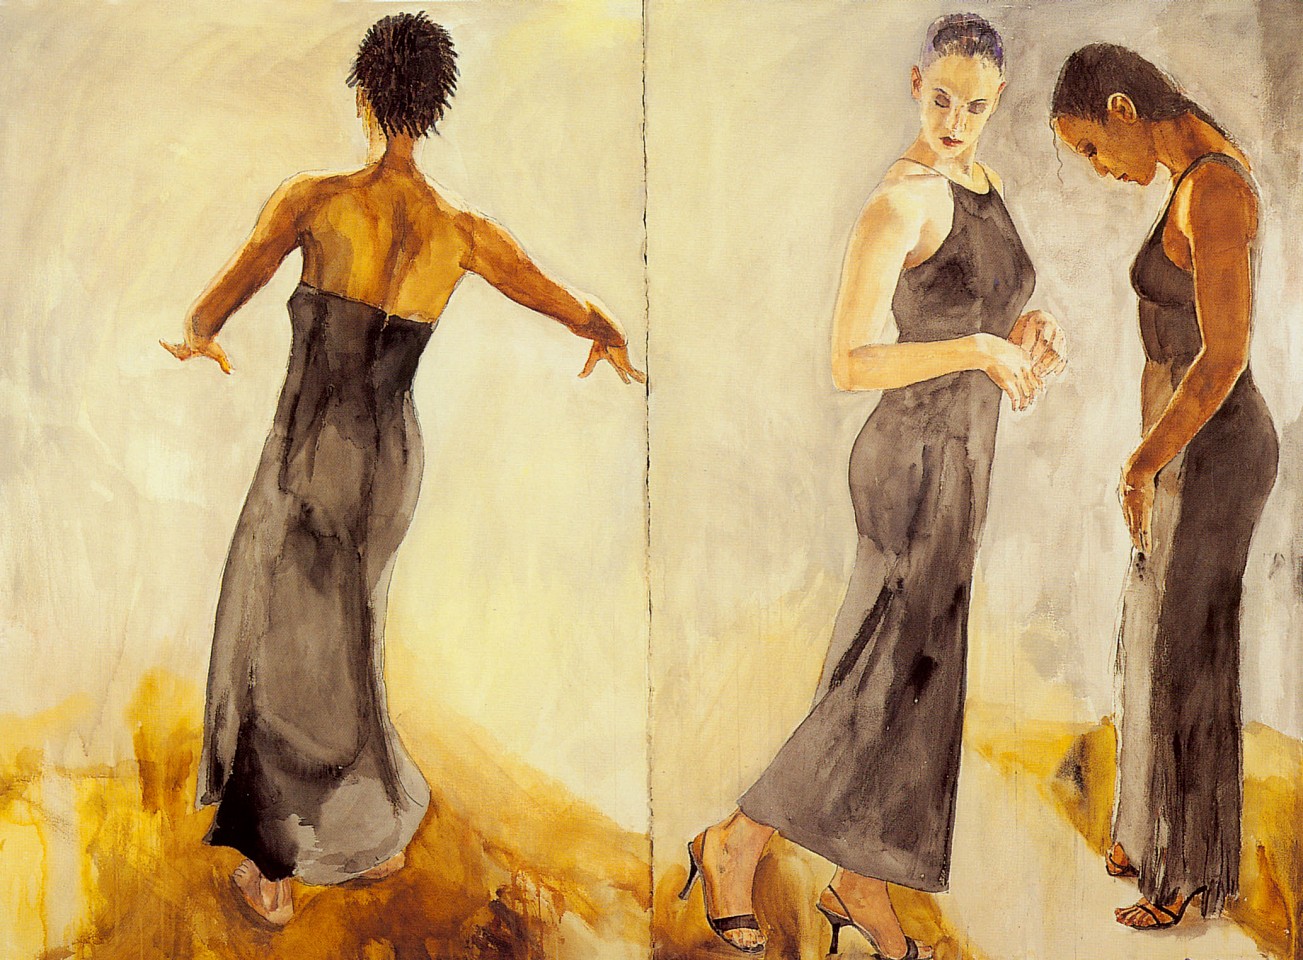 David Remfry, Dancers, 2000
Watercolor on paper, 60 x 80 inches
REMF0042